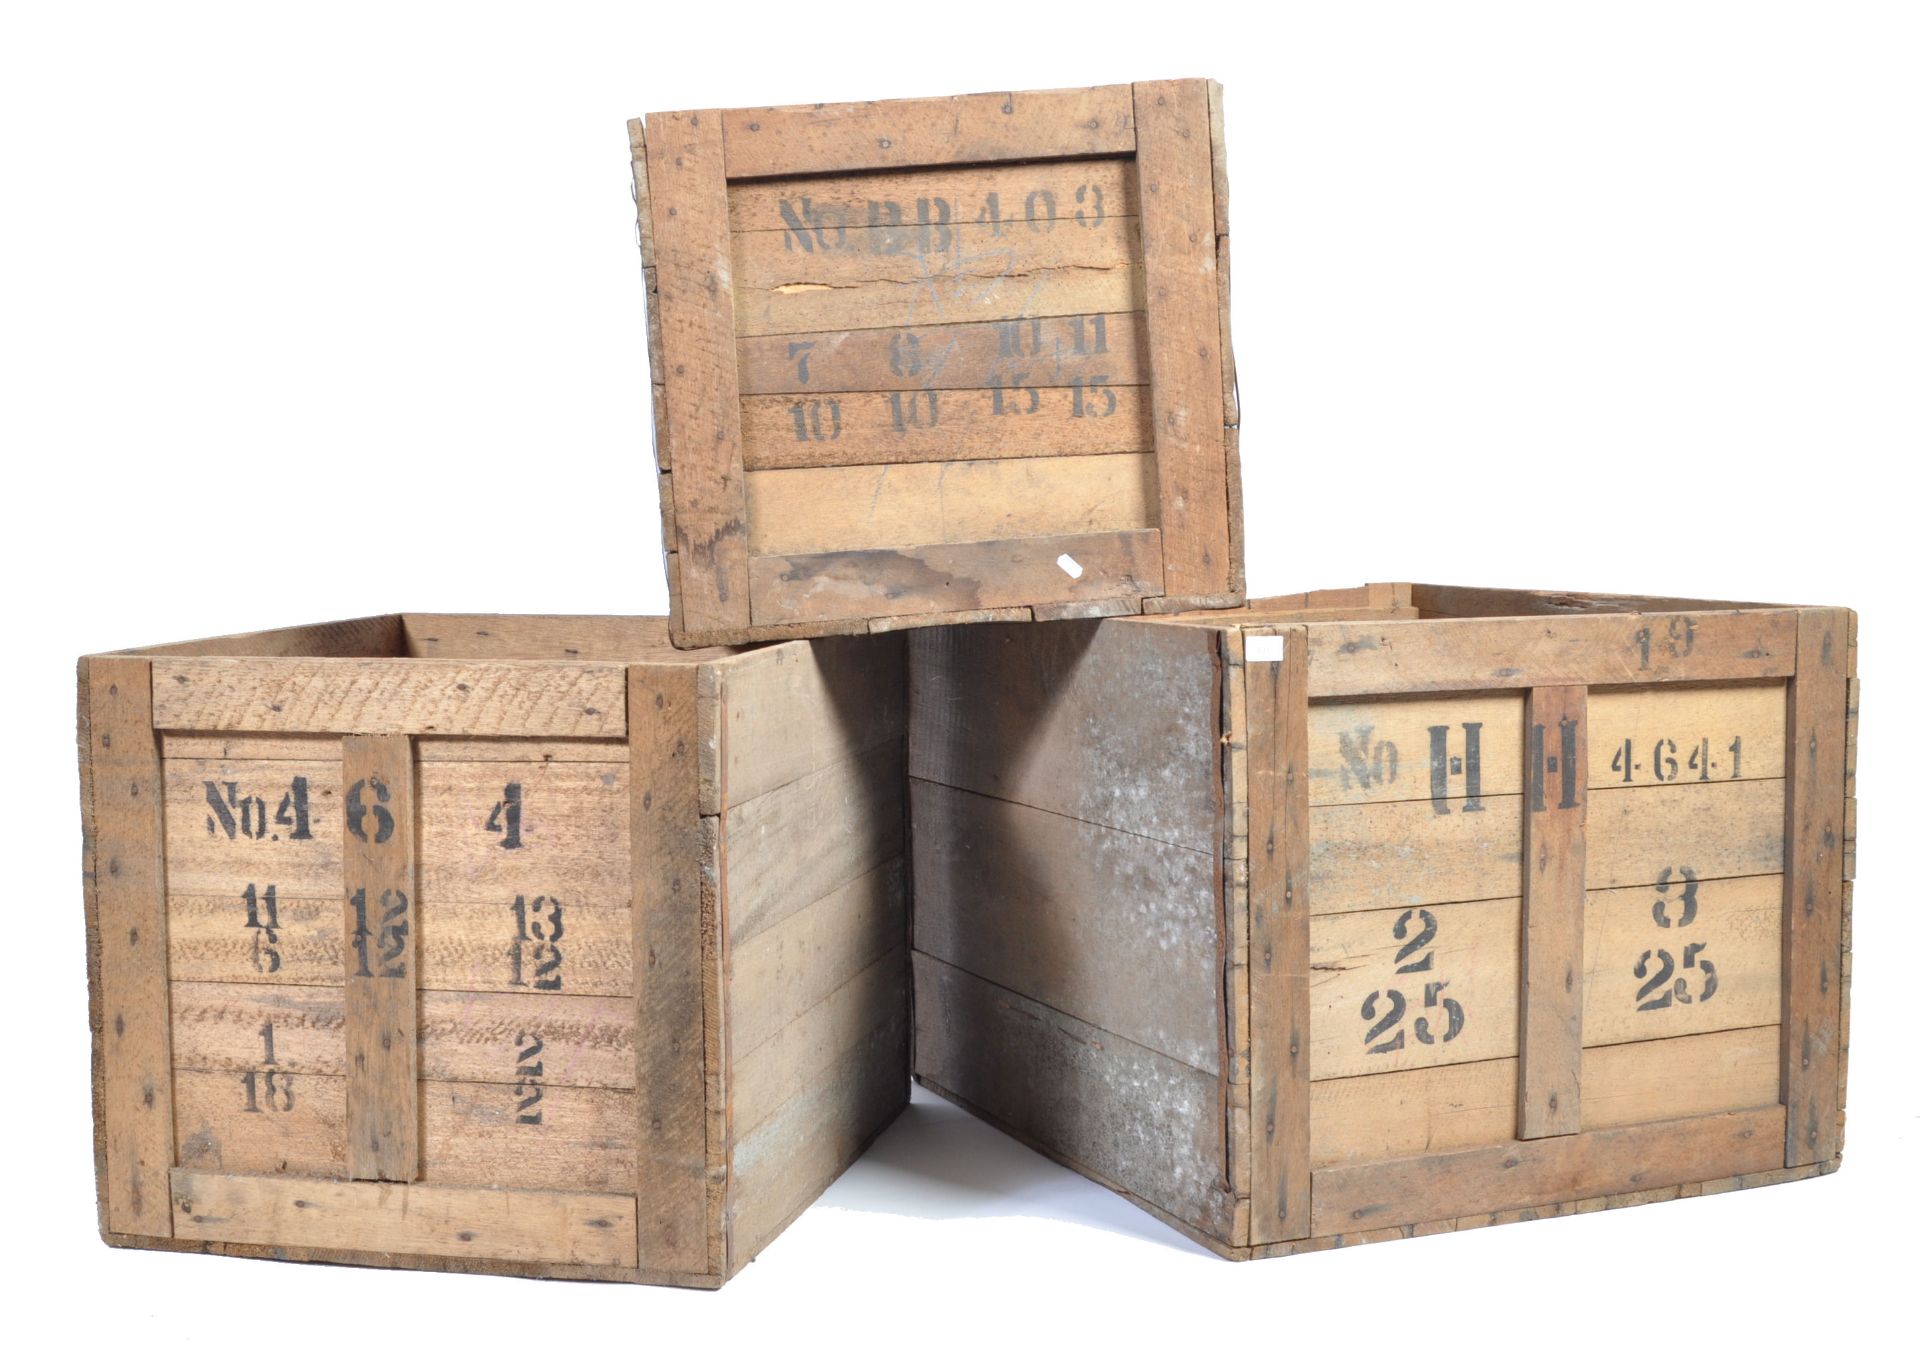 ORIGINAL VINTAGE OPEN TOPPED WOODEN SHIPPING CRATES